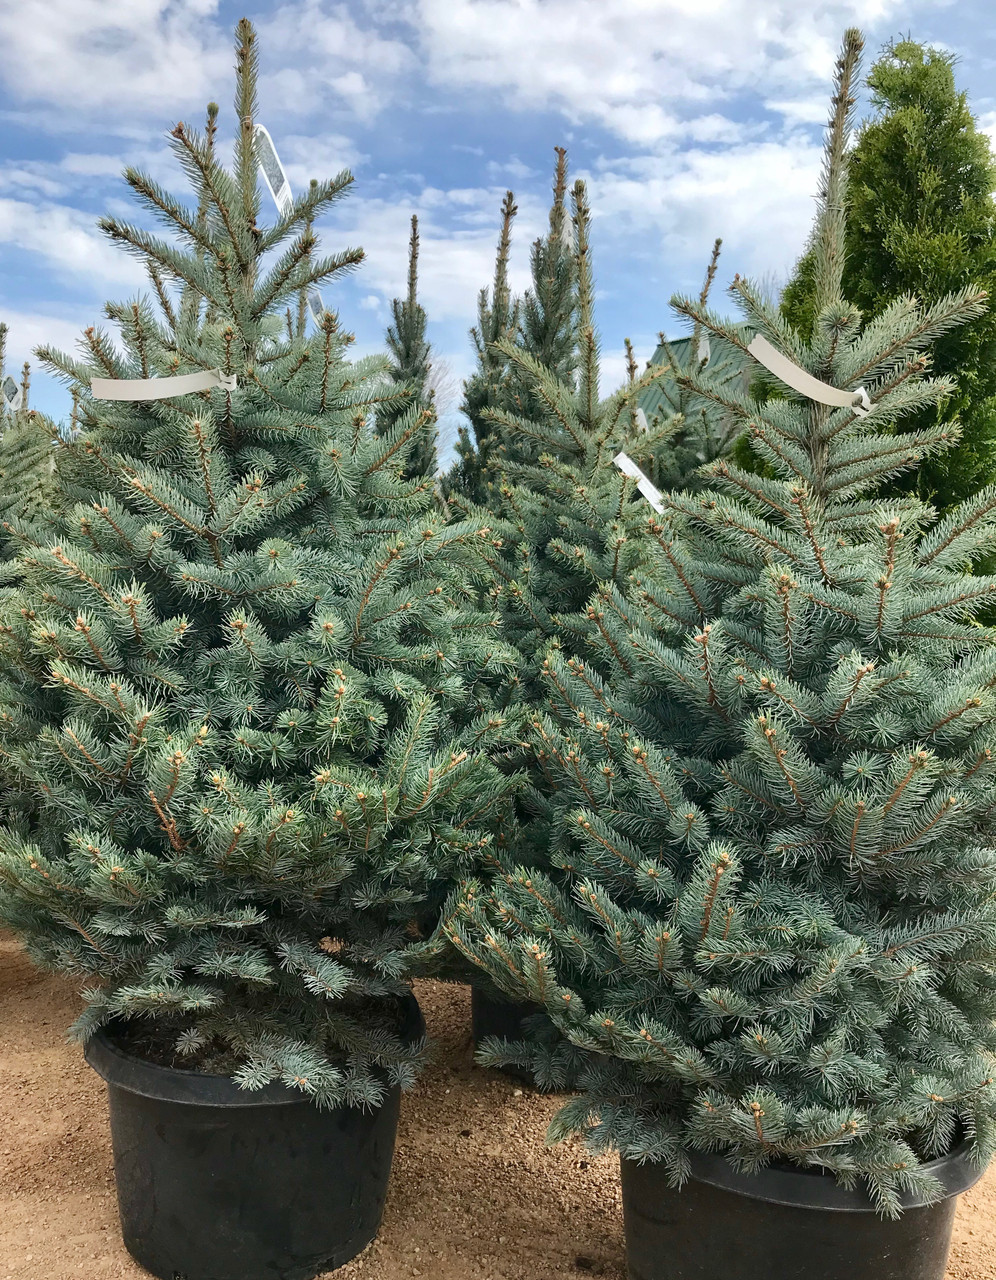 Picea Pungens (Baby Blue Spruce) 'Blue Is Cool